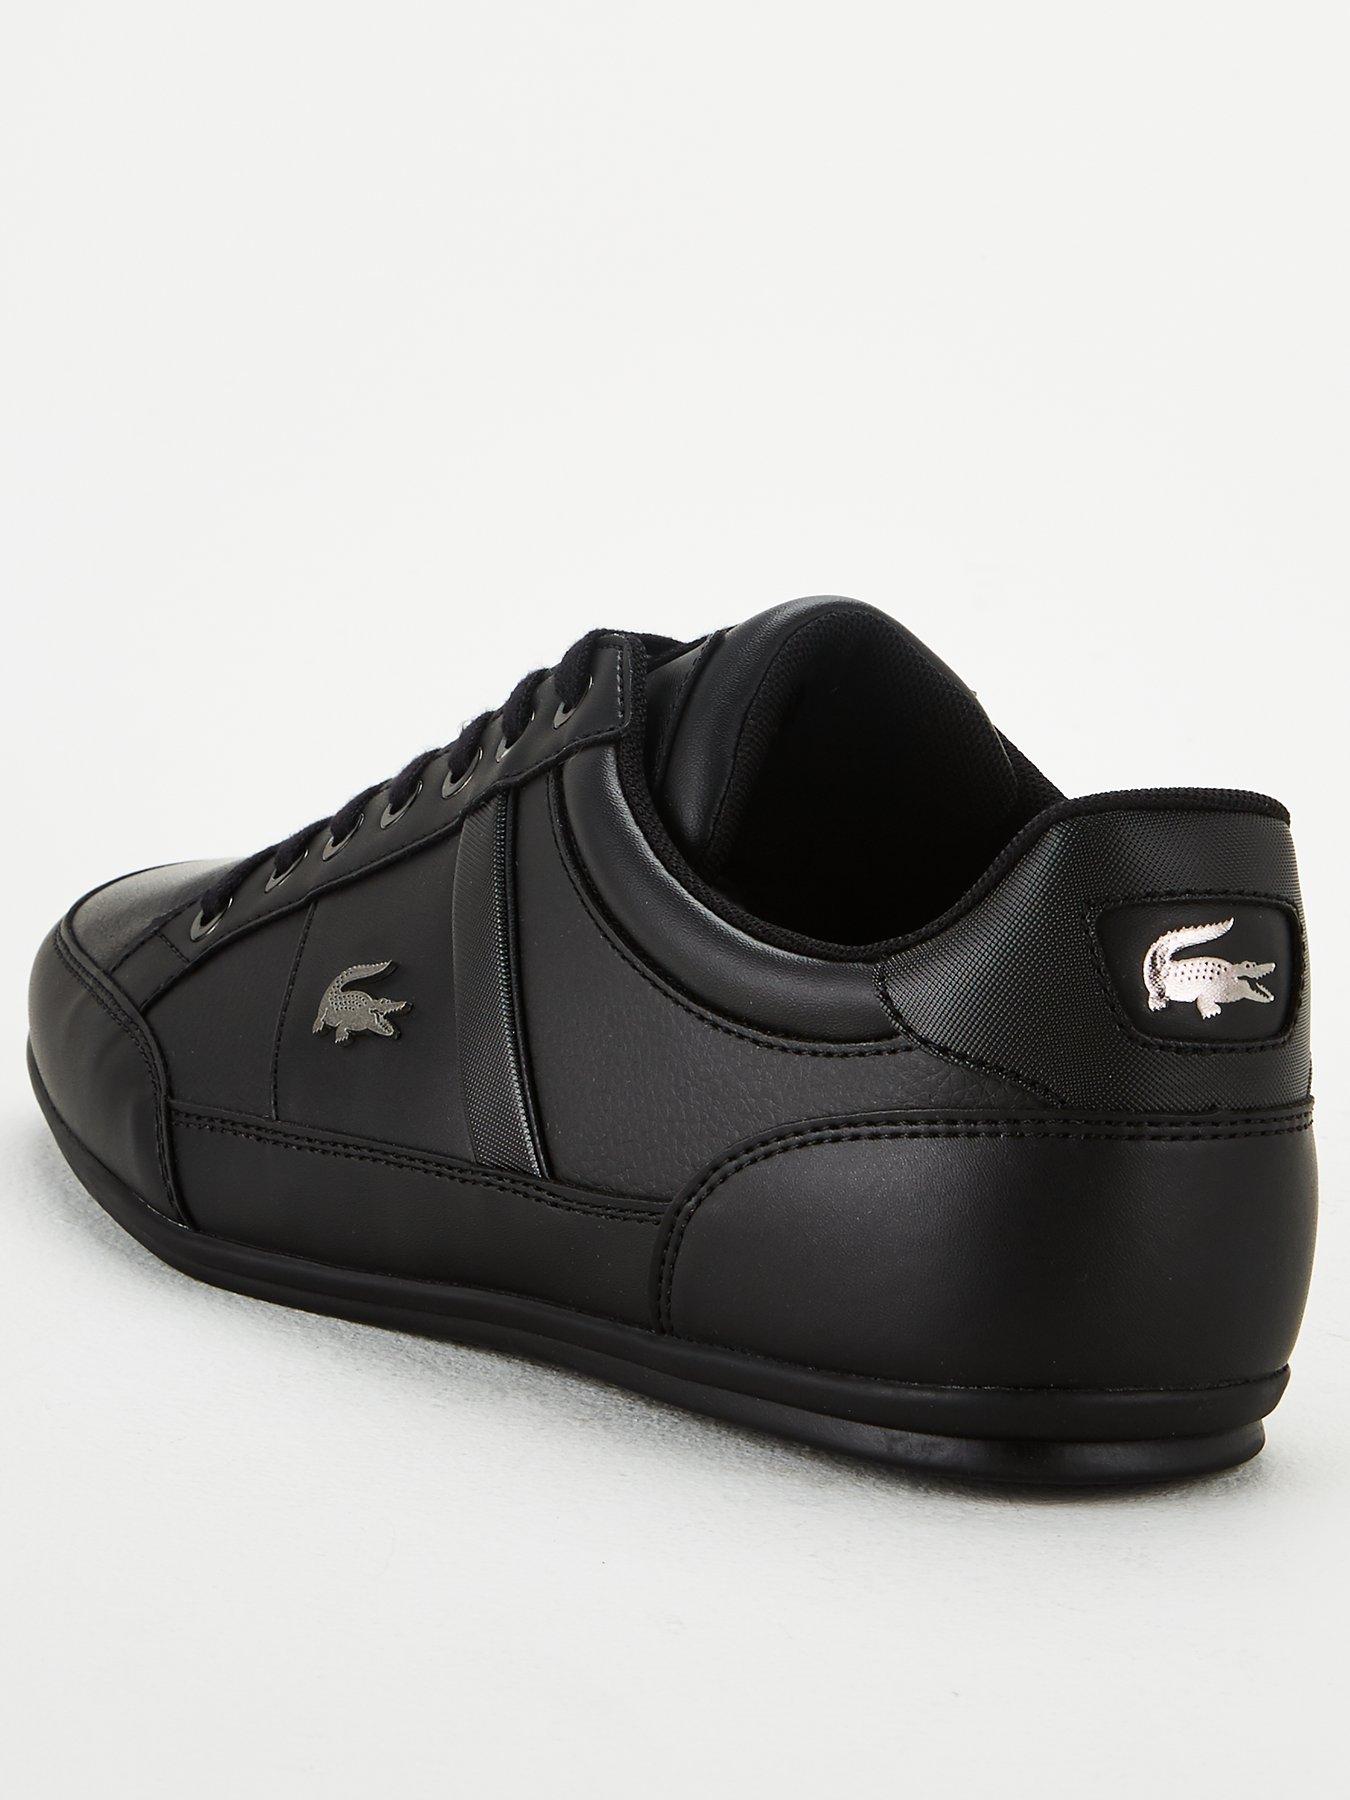 lacoste chaymon leather trainers